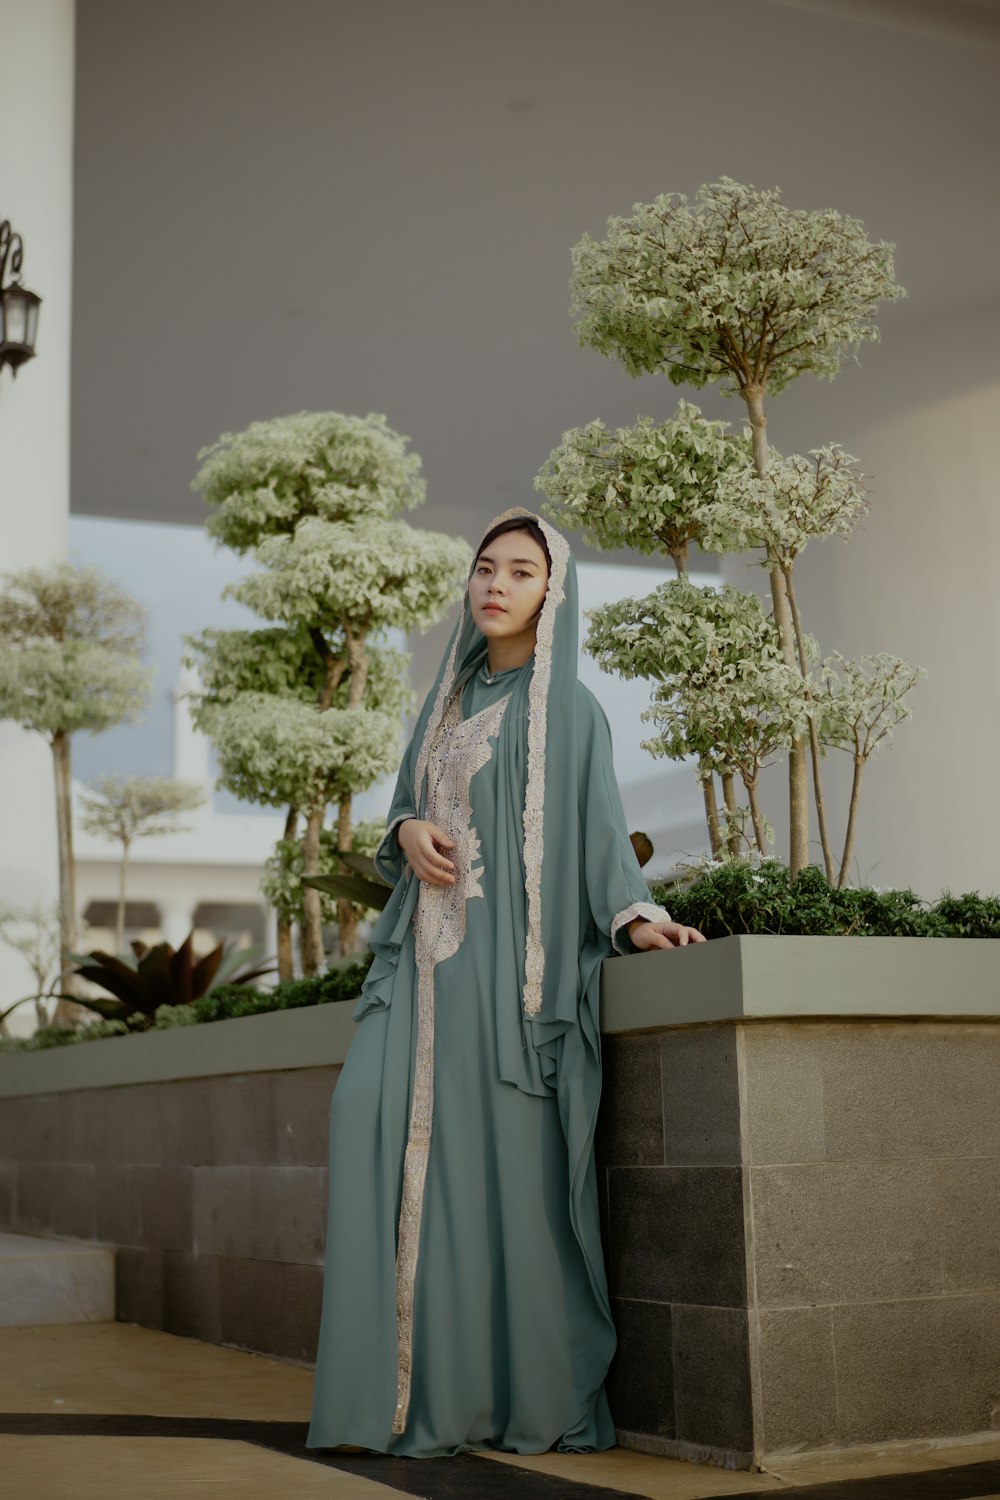 woman in gray hijab standing near green plant during daytime